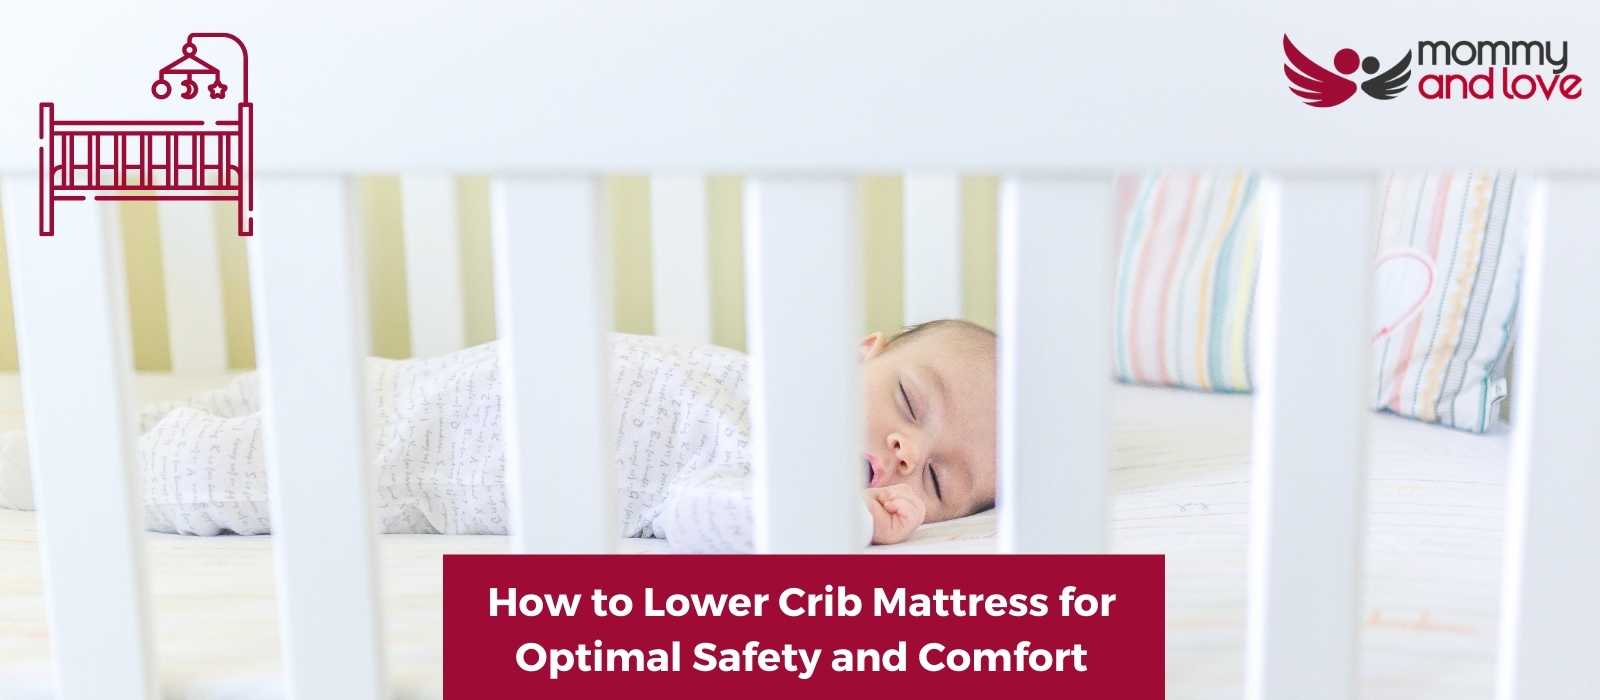 How to Lower Crib Mattress for Optimal Safety and Comfort